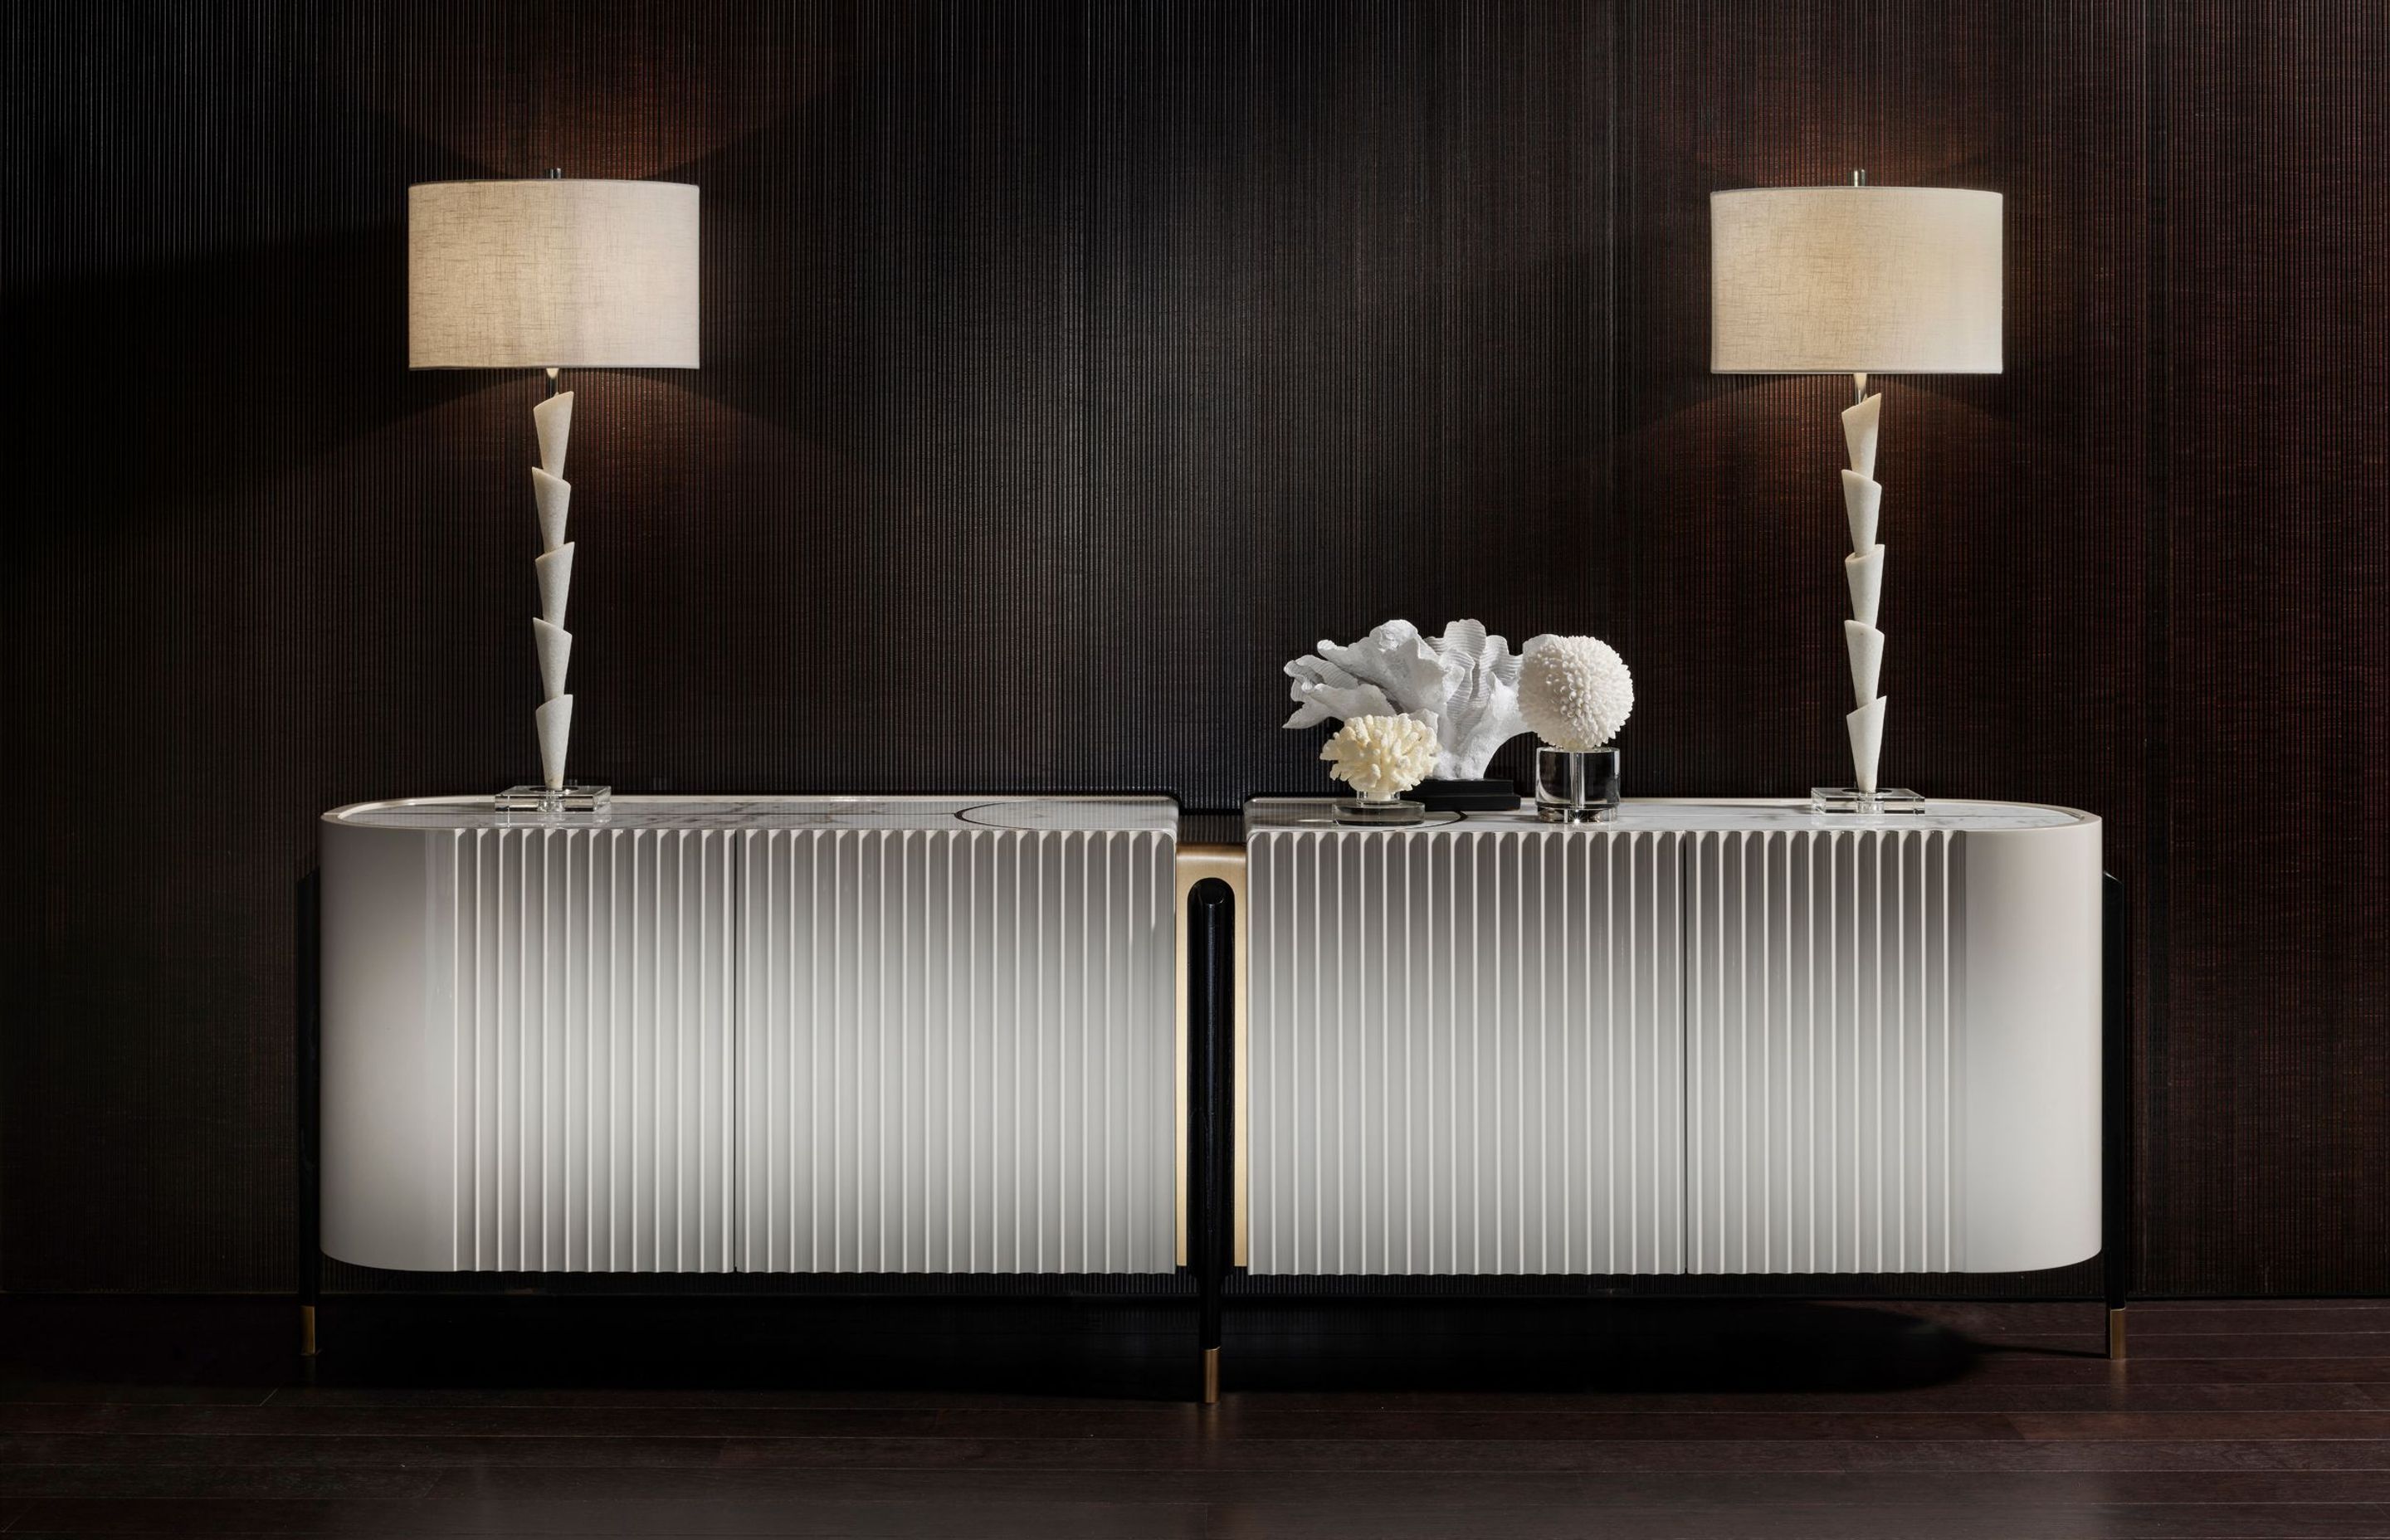 With it's symmetrical 'book end' design and fluted detailing, the Avenue Credenza is a statement piece suited to both contemporary and traditional design schemes.